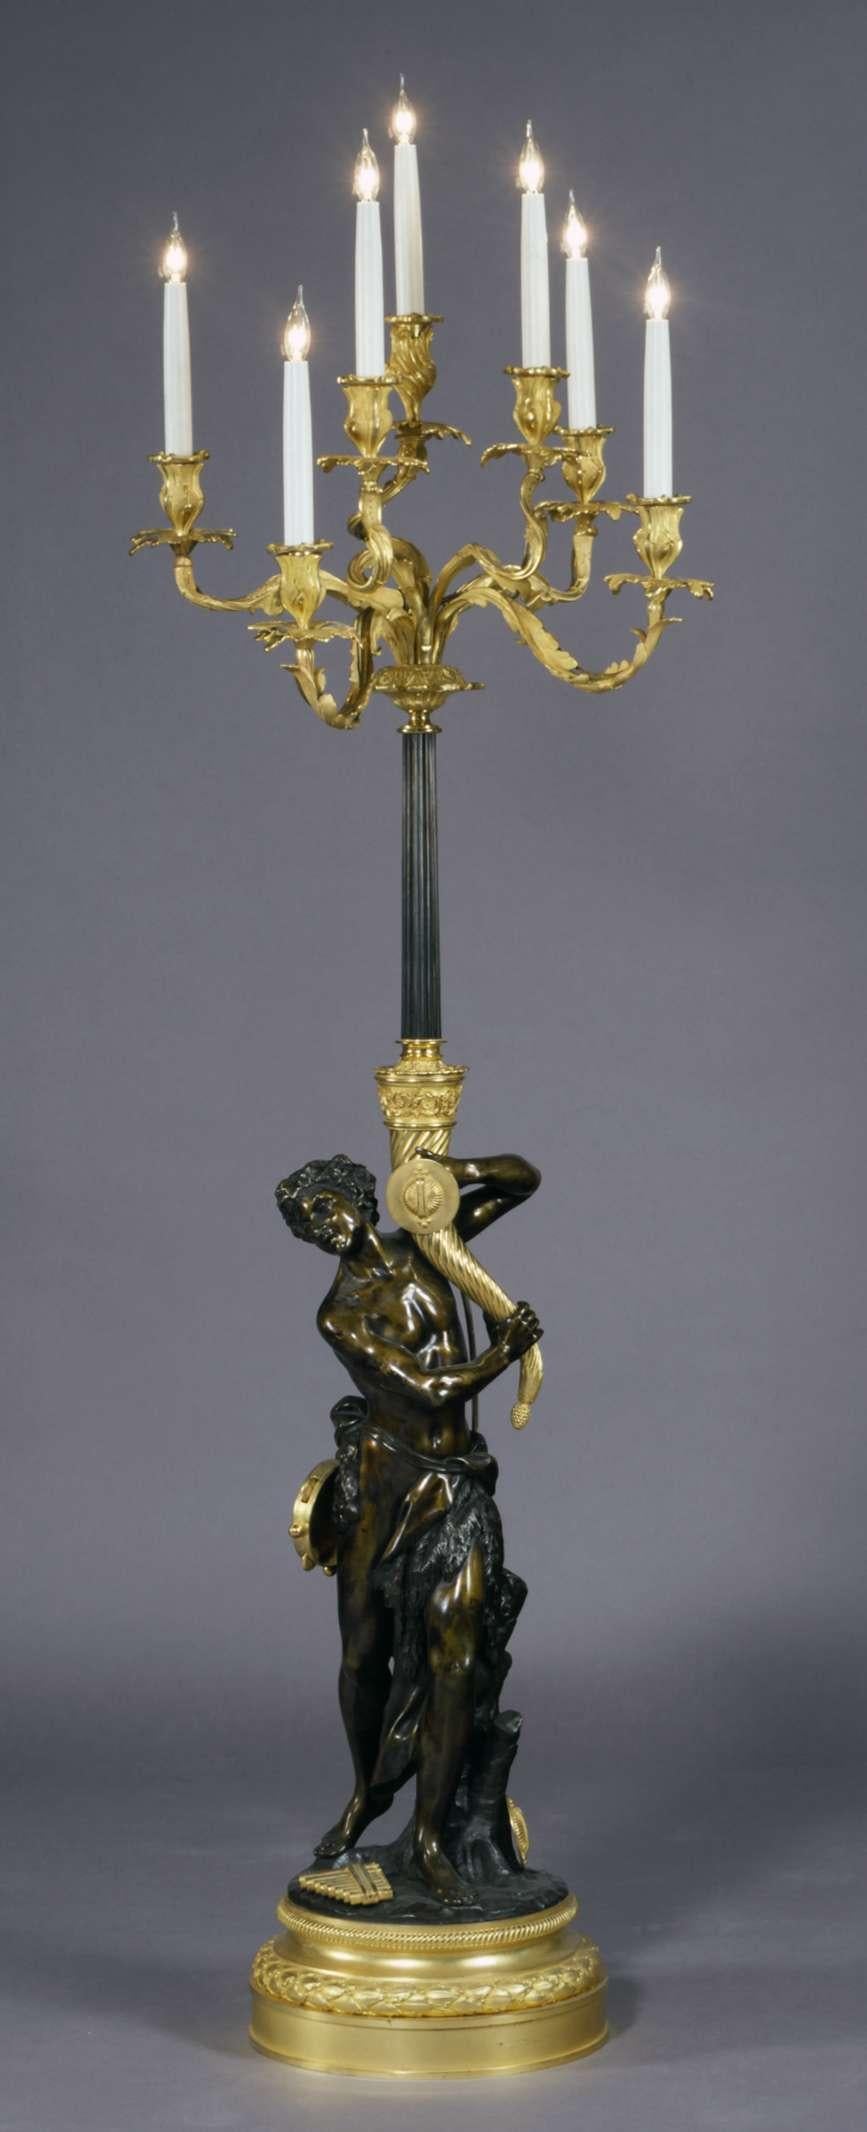 A very fine gilt and patinated bronze floor standing candelabrum, after a model by Clodion.

French, circa 1880.

Claude Michael Clodion, (1738-1814), was the son-in-law of sculptor Augustin Pajou; he trained in Paris in the workshops of Lambert